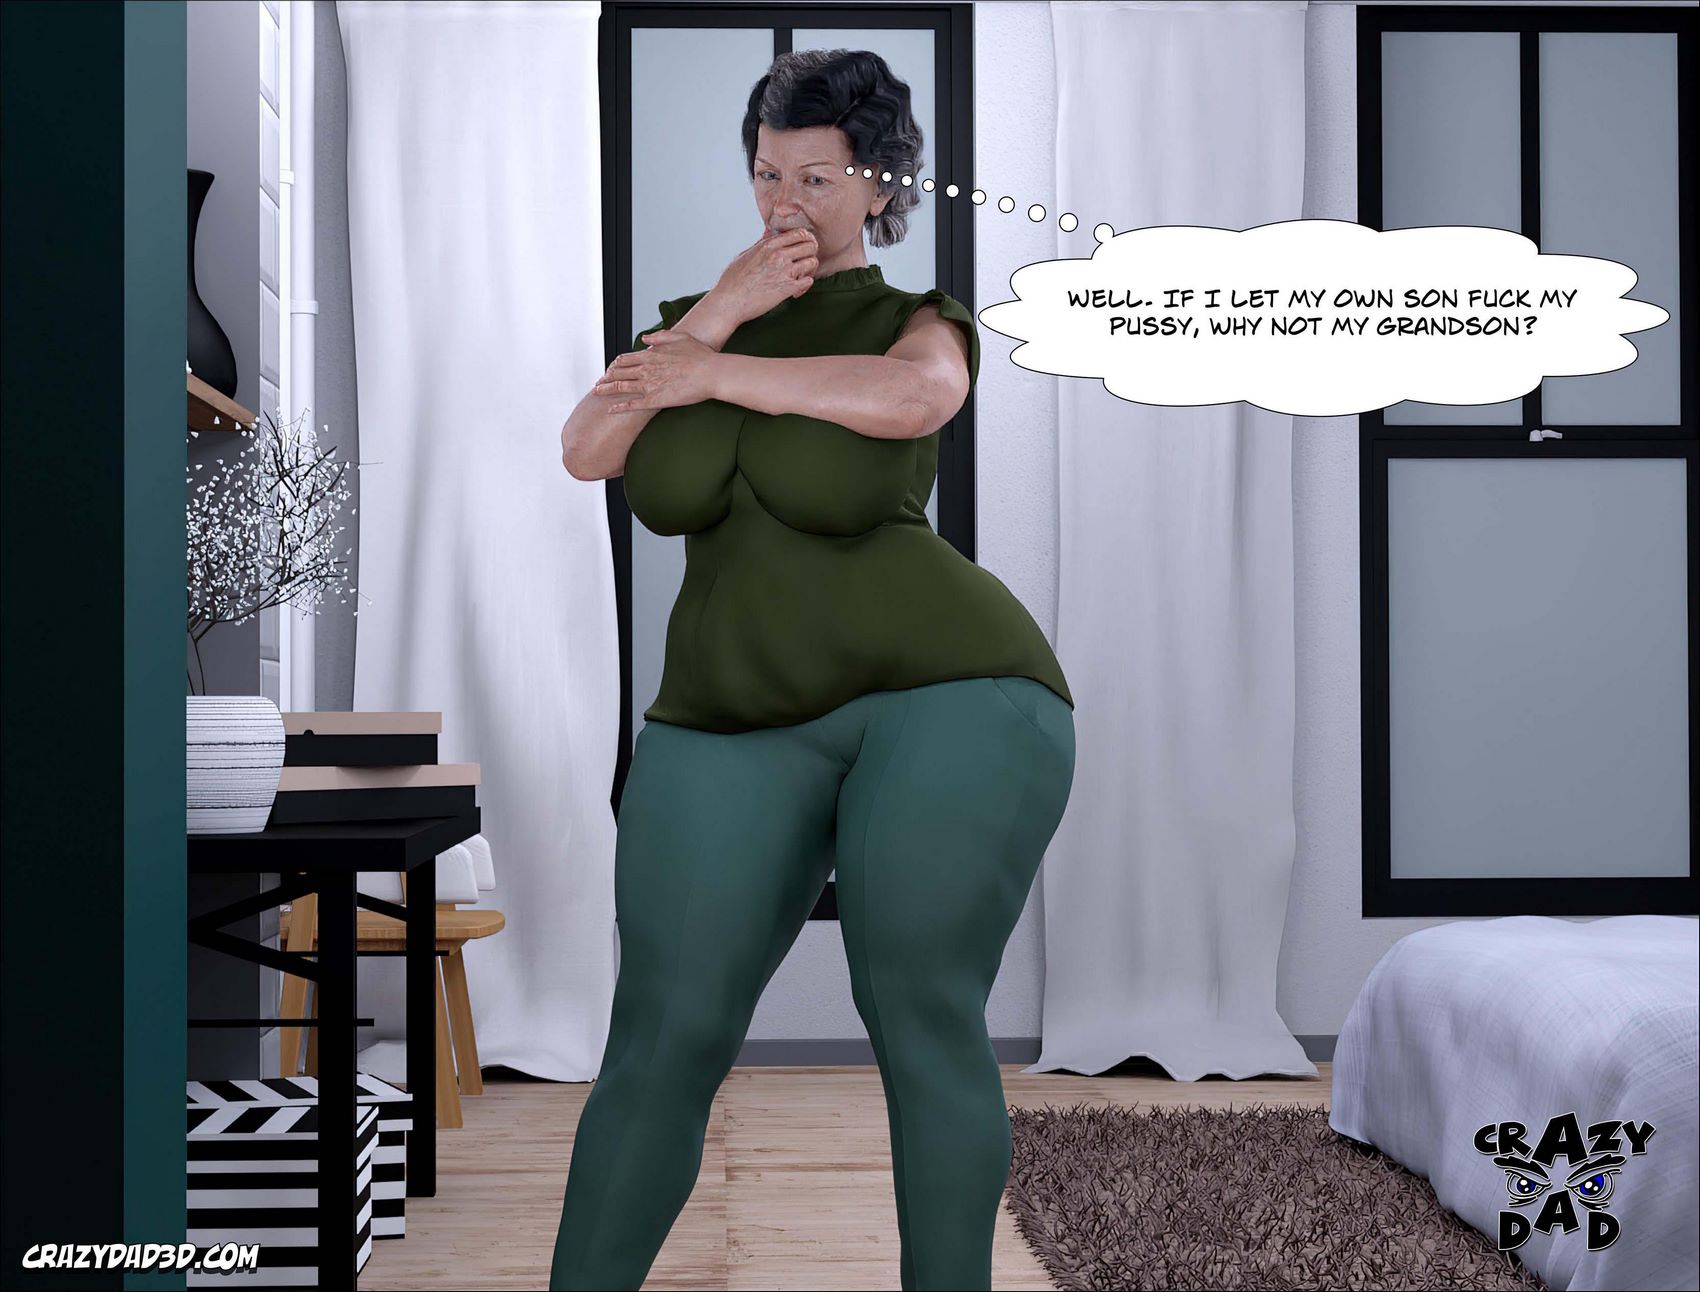 Father-in-Law at Home Part 33 – CrazyDad3D